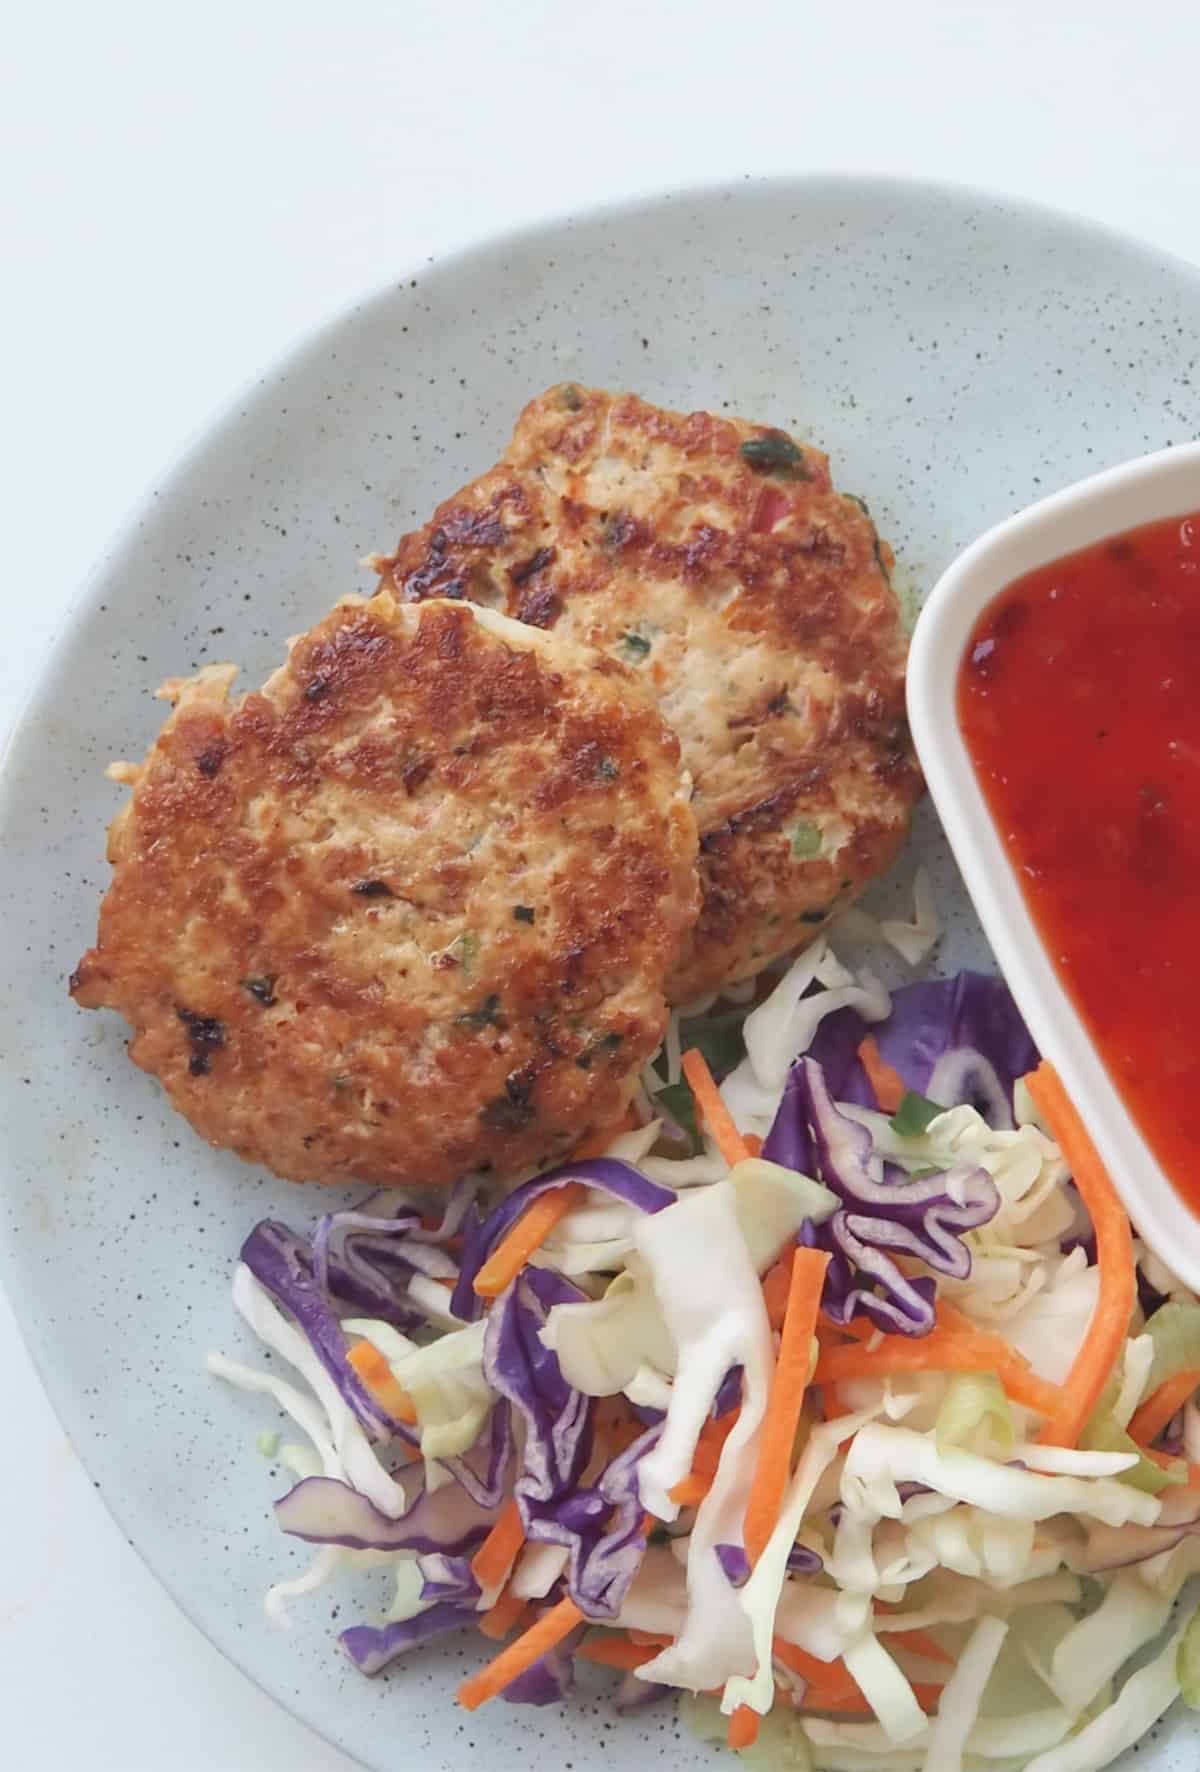 Overhead view of chicken rissoles on a green plate served with coleslaw and sweet chilli sauce.